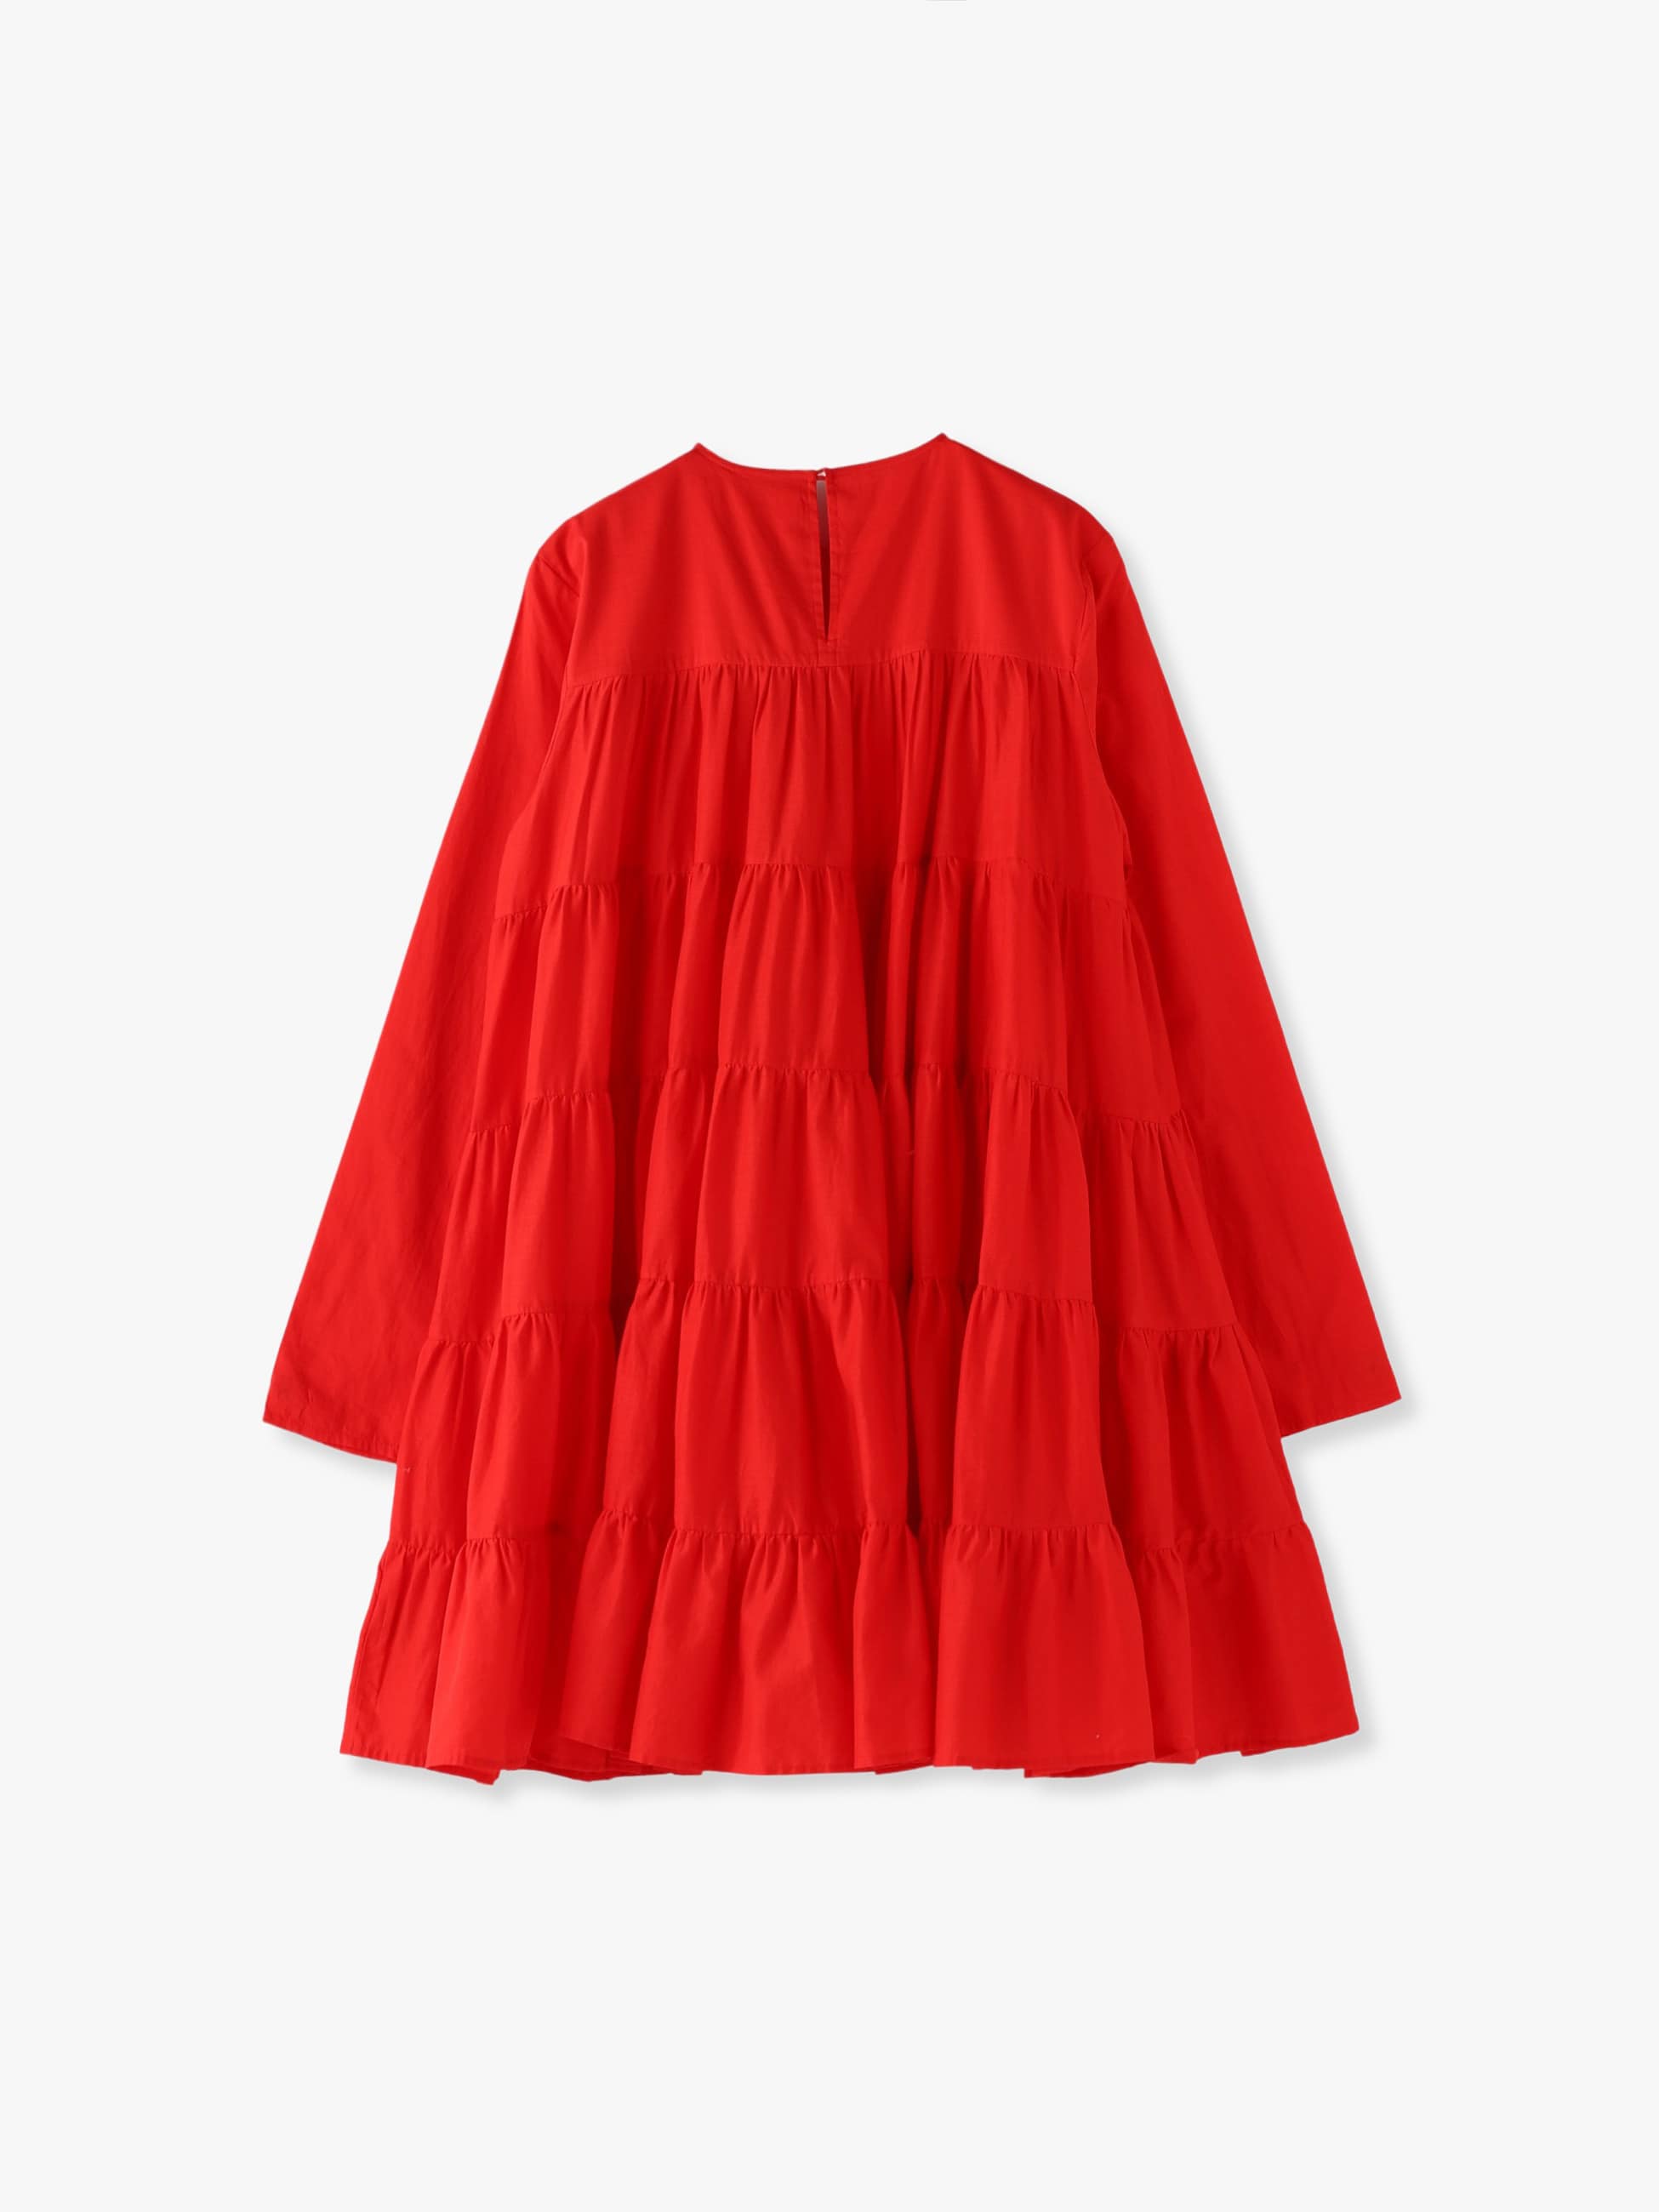 Soliman Dress (red)